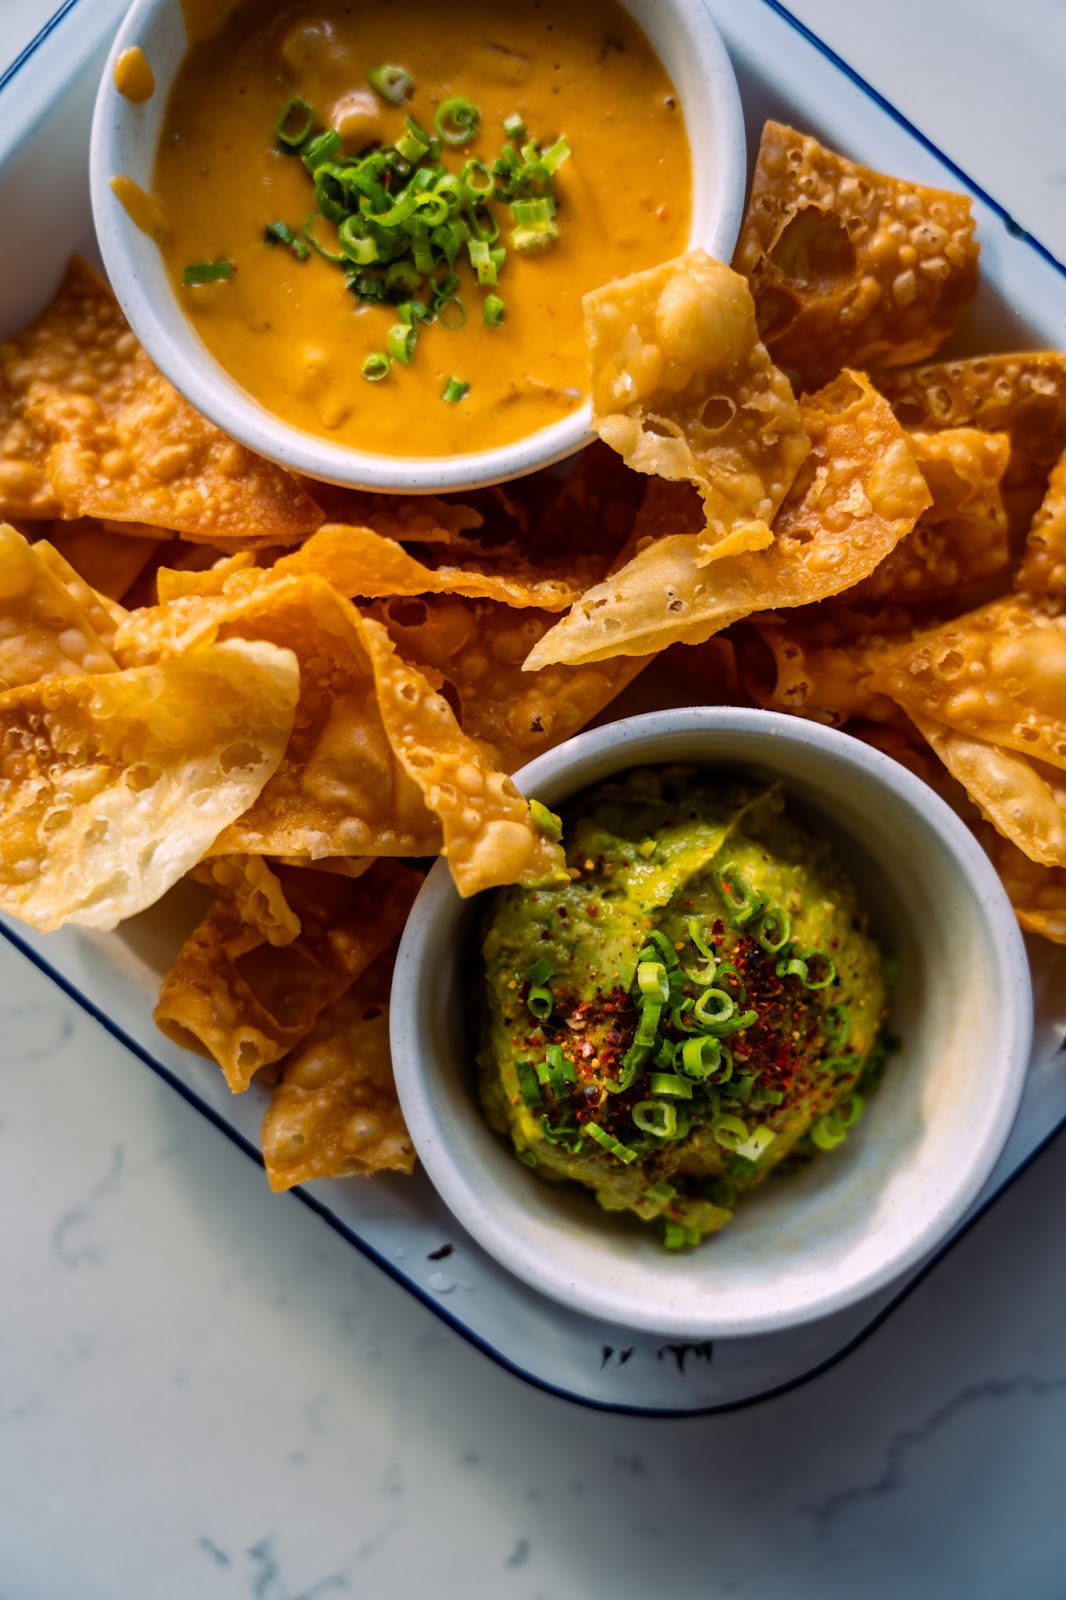 the restaurant style queso served with chips and guacamole